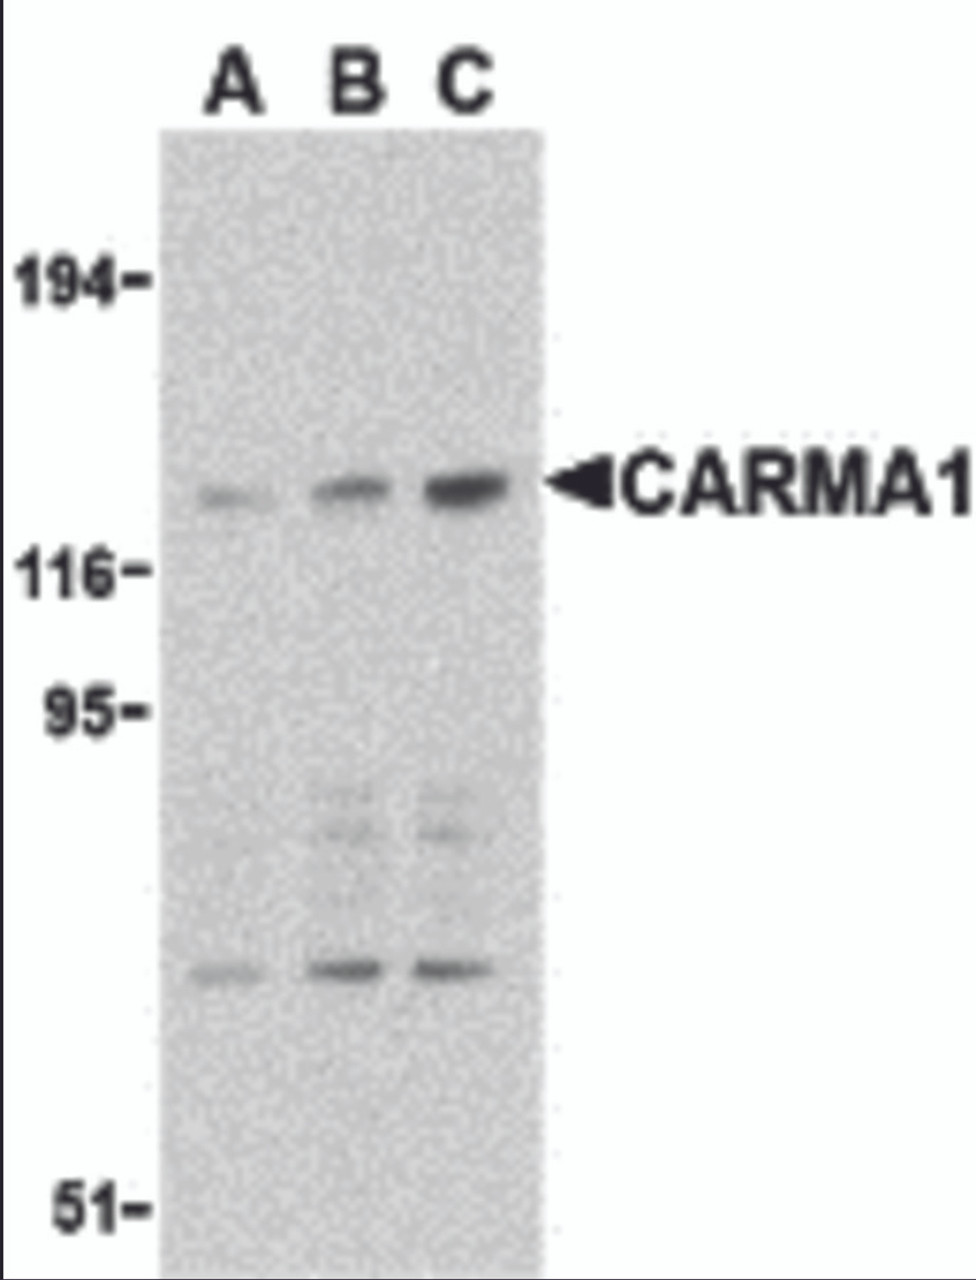 Western blot analysis of CARMA1 expression in mouse thymus cell lysate with CARMA1 antibody at 0.5 (lane A) , 1 (lane B) , and 2 &#956;g/ml (lane C) , respectively.